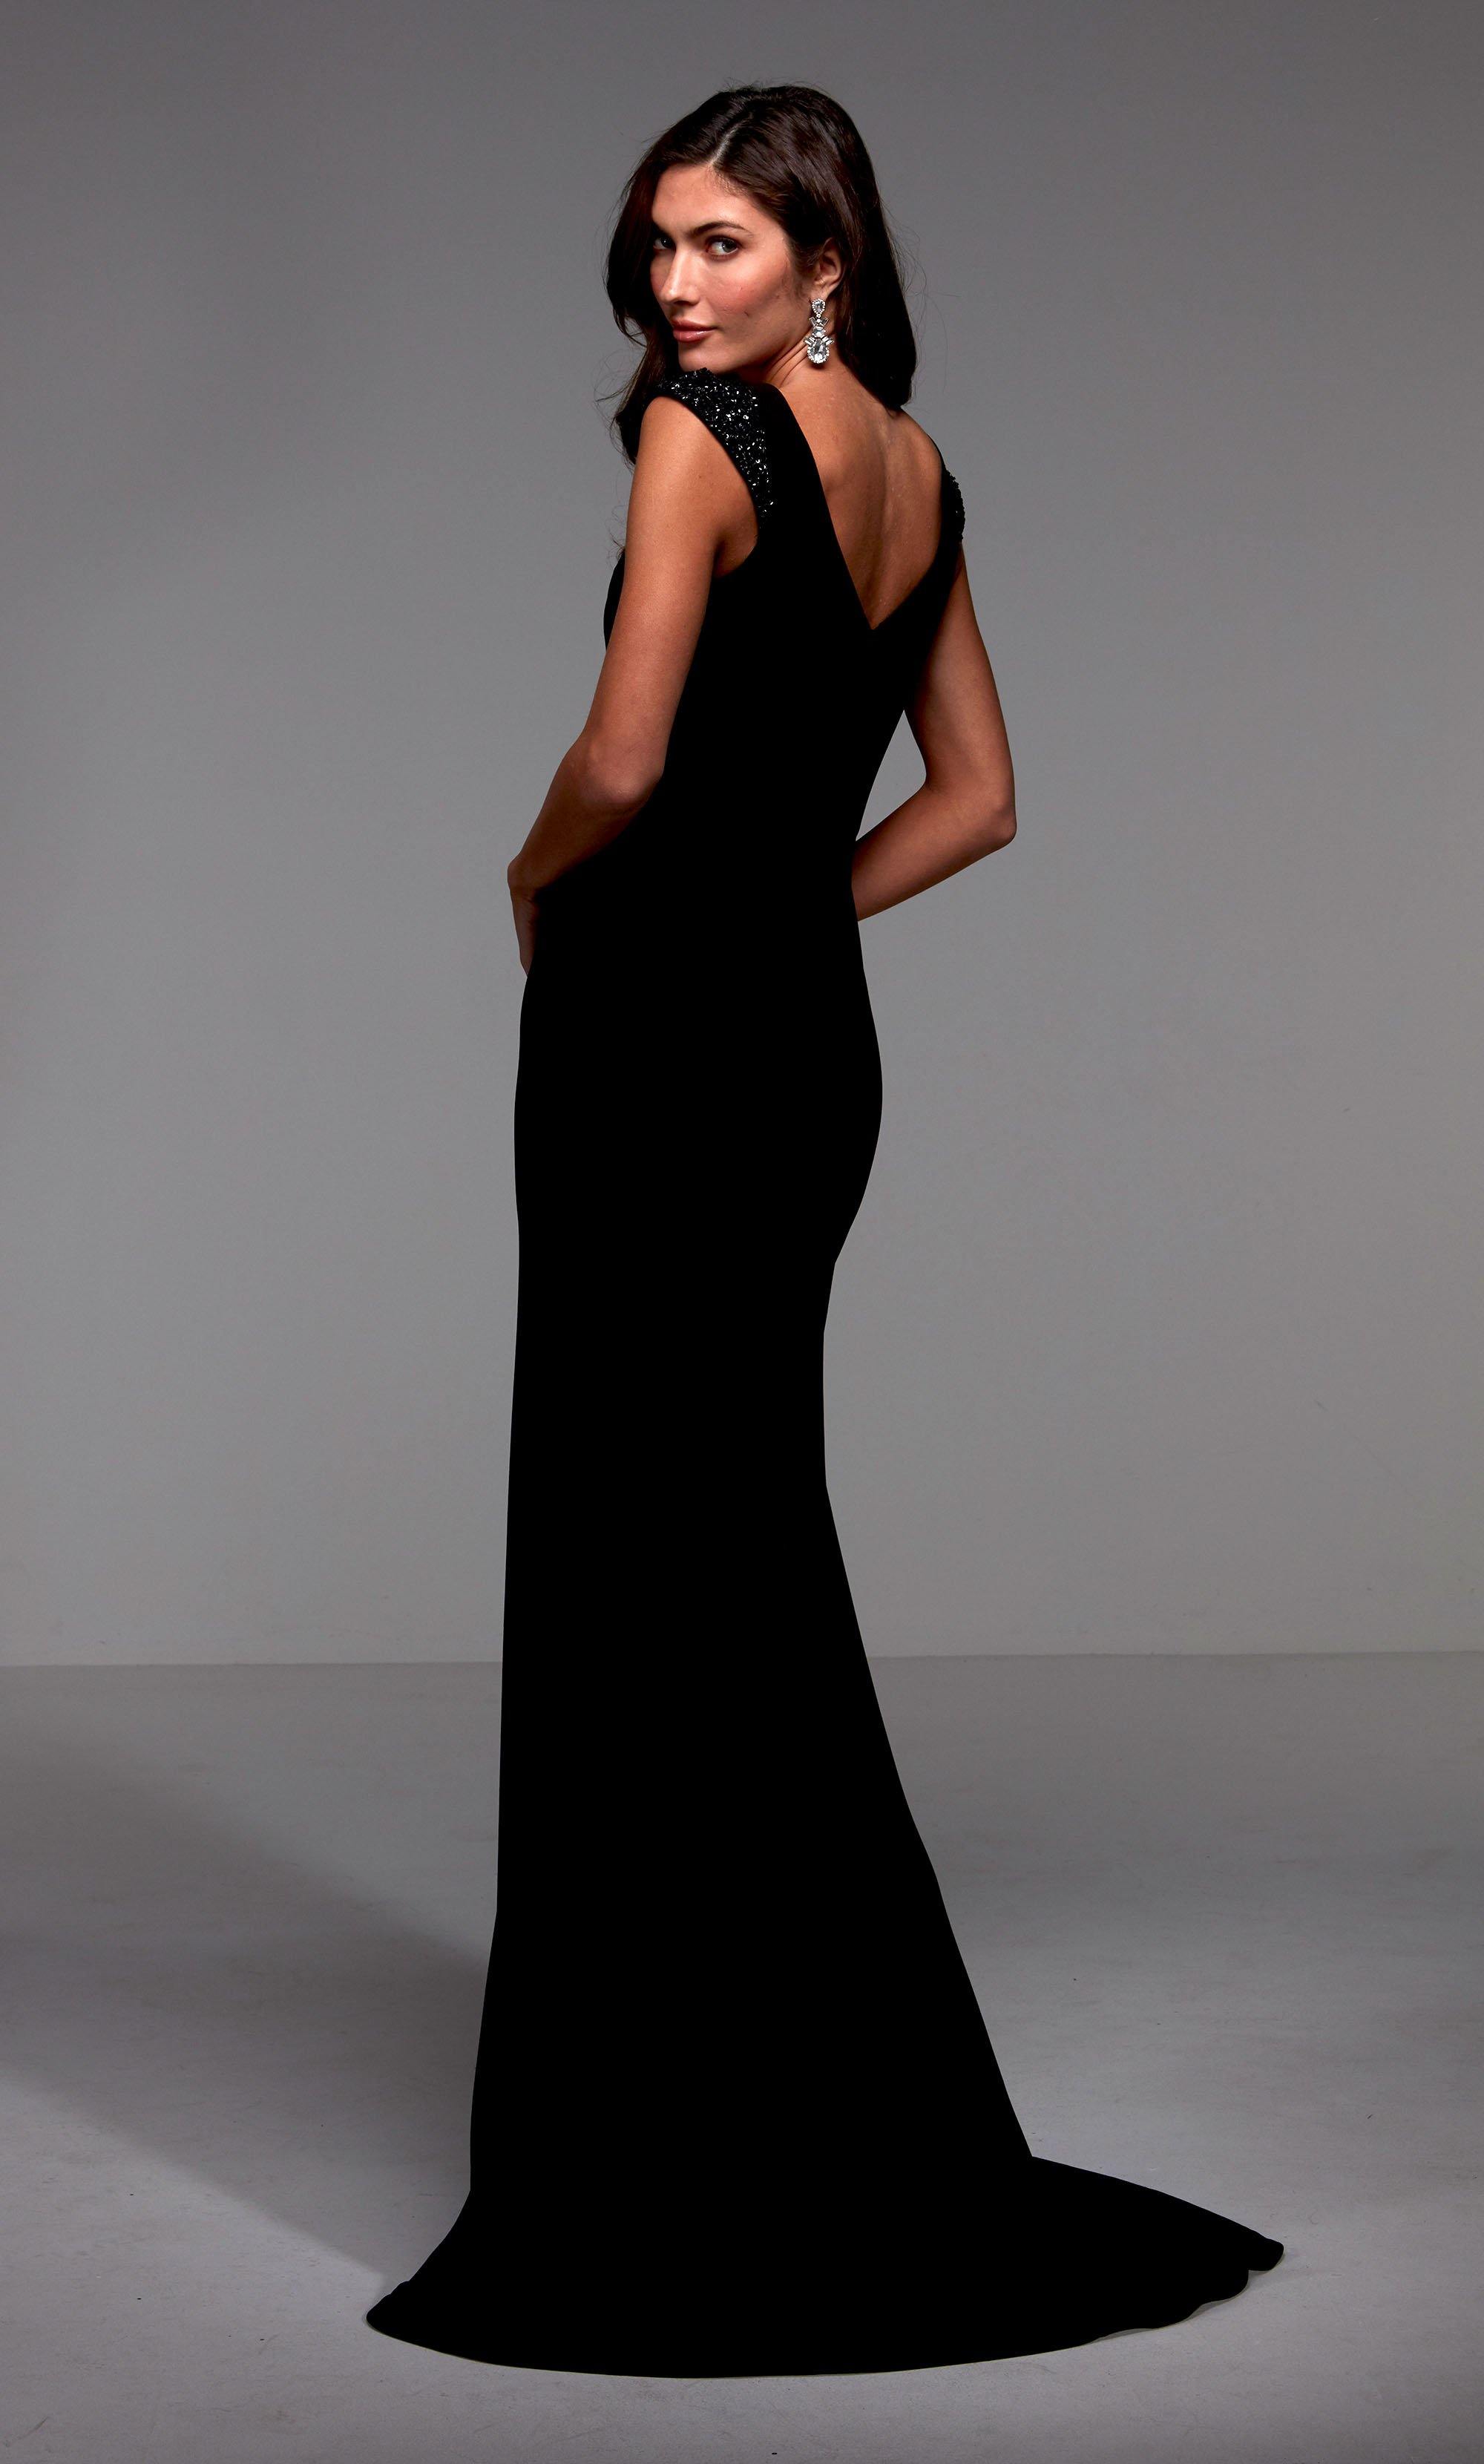 Black high scoop neck long evening dress with beaded capped sleeves